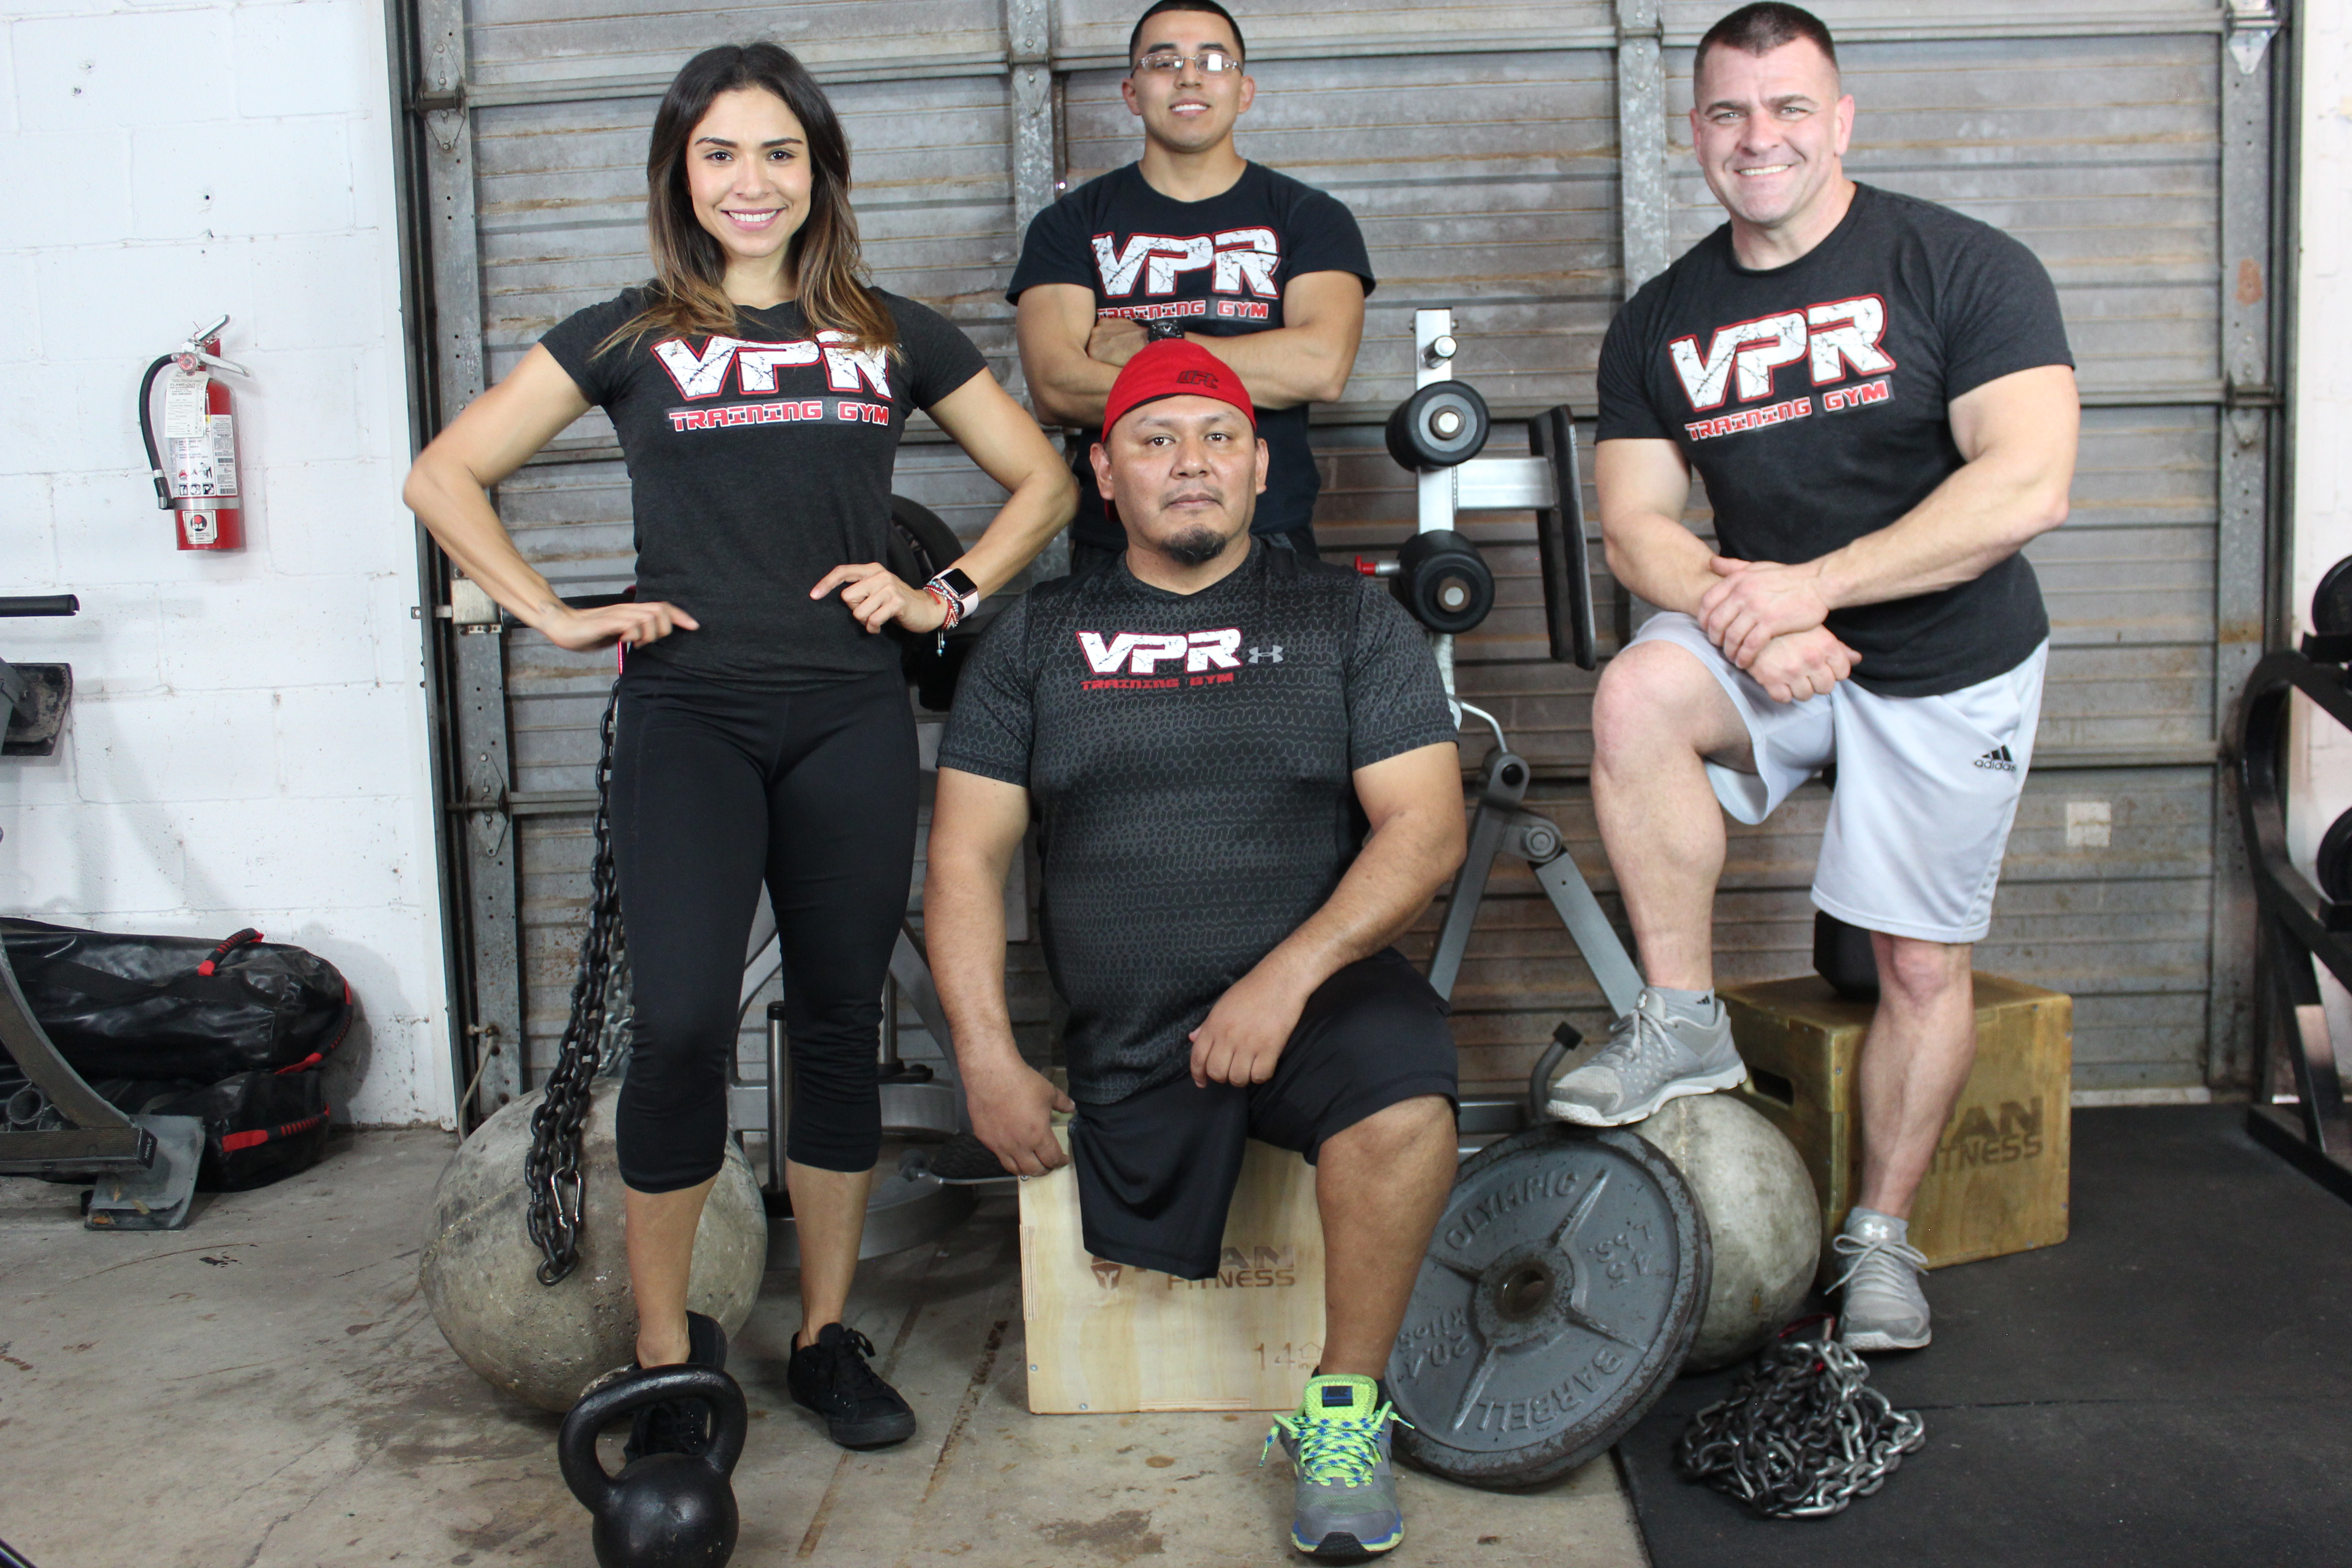 Let's Get Physical in 2022 at these 7 Gyms in McAllen!